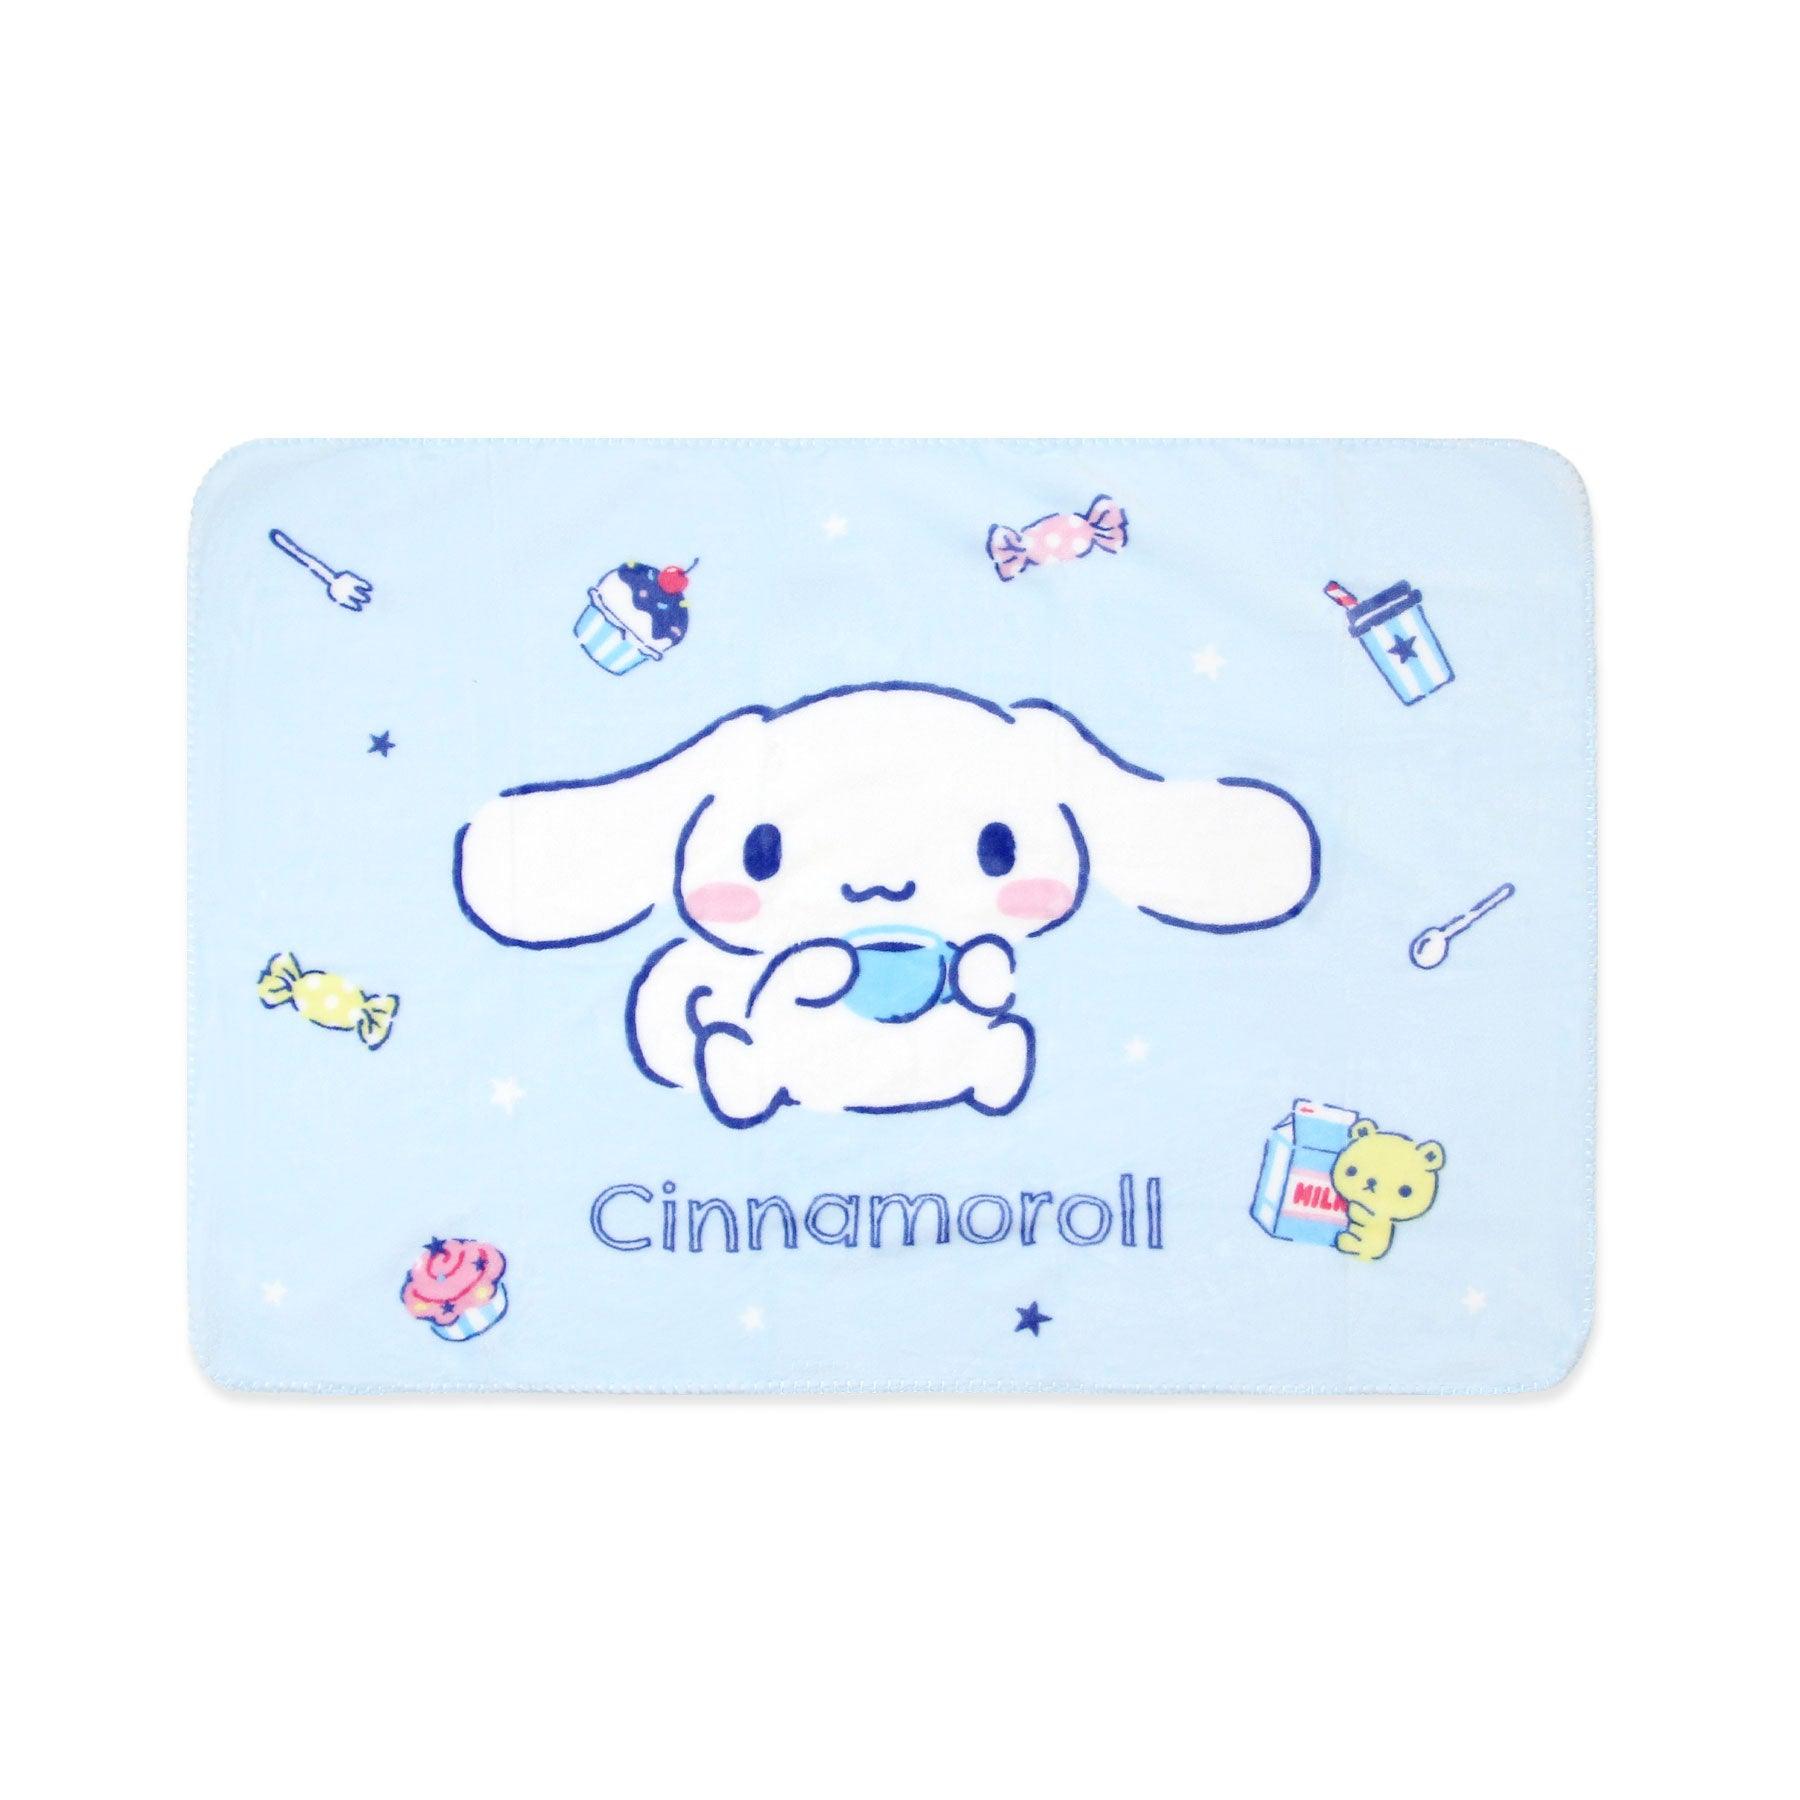 SANRIO CHARACTERS FLANNEL BLANKET - Shopping Around the World with Goodsnjoy